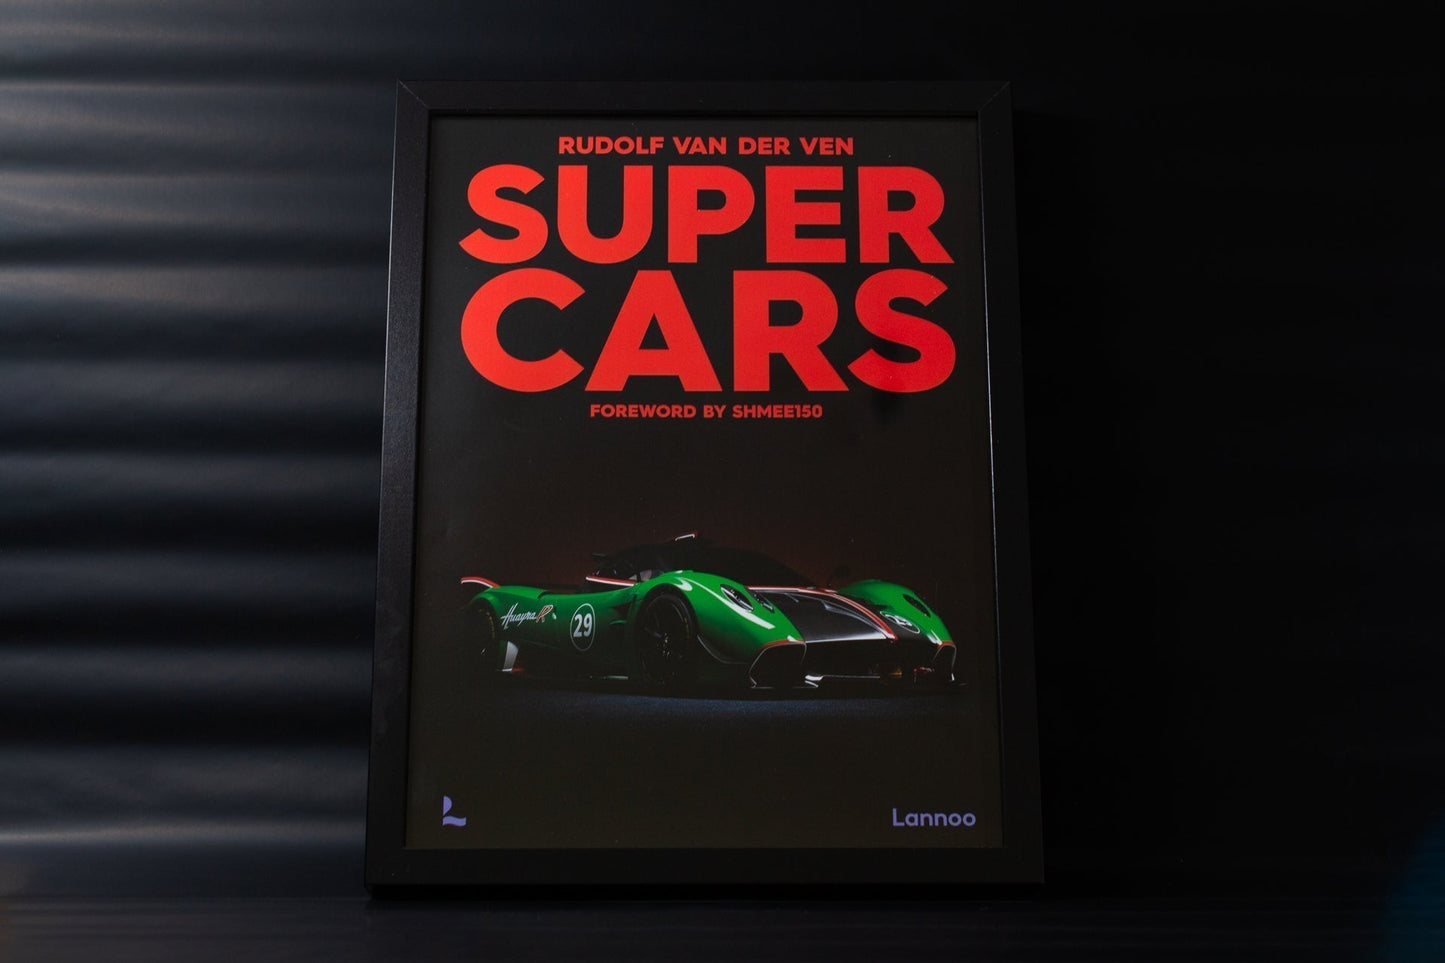 Supercars One-of-One Owners' Edition - Porsche 918 Spyder (pre-order)